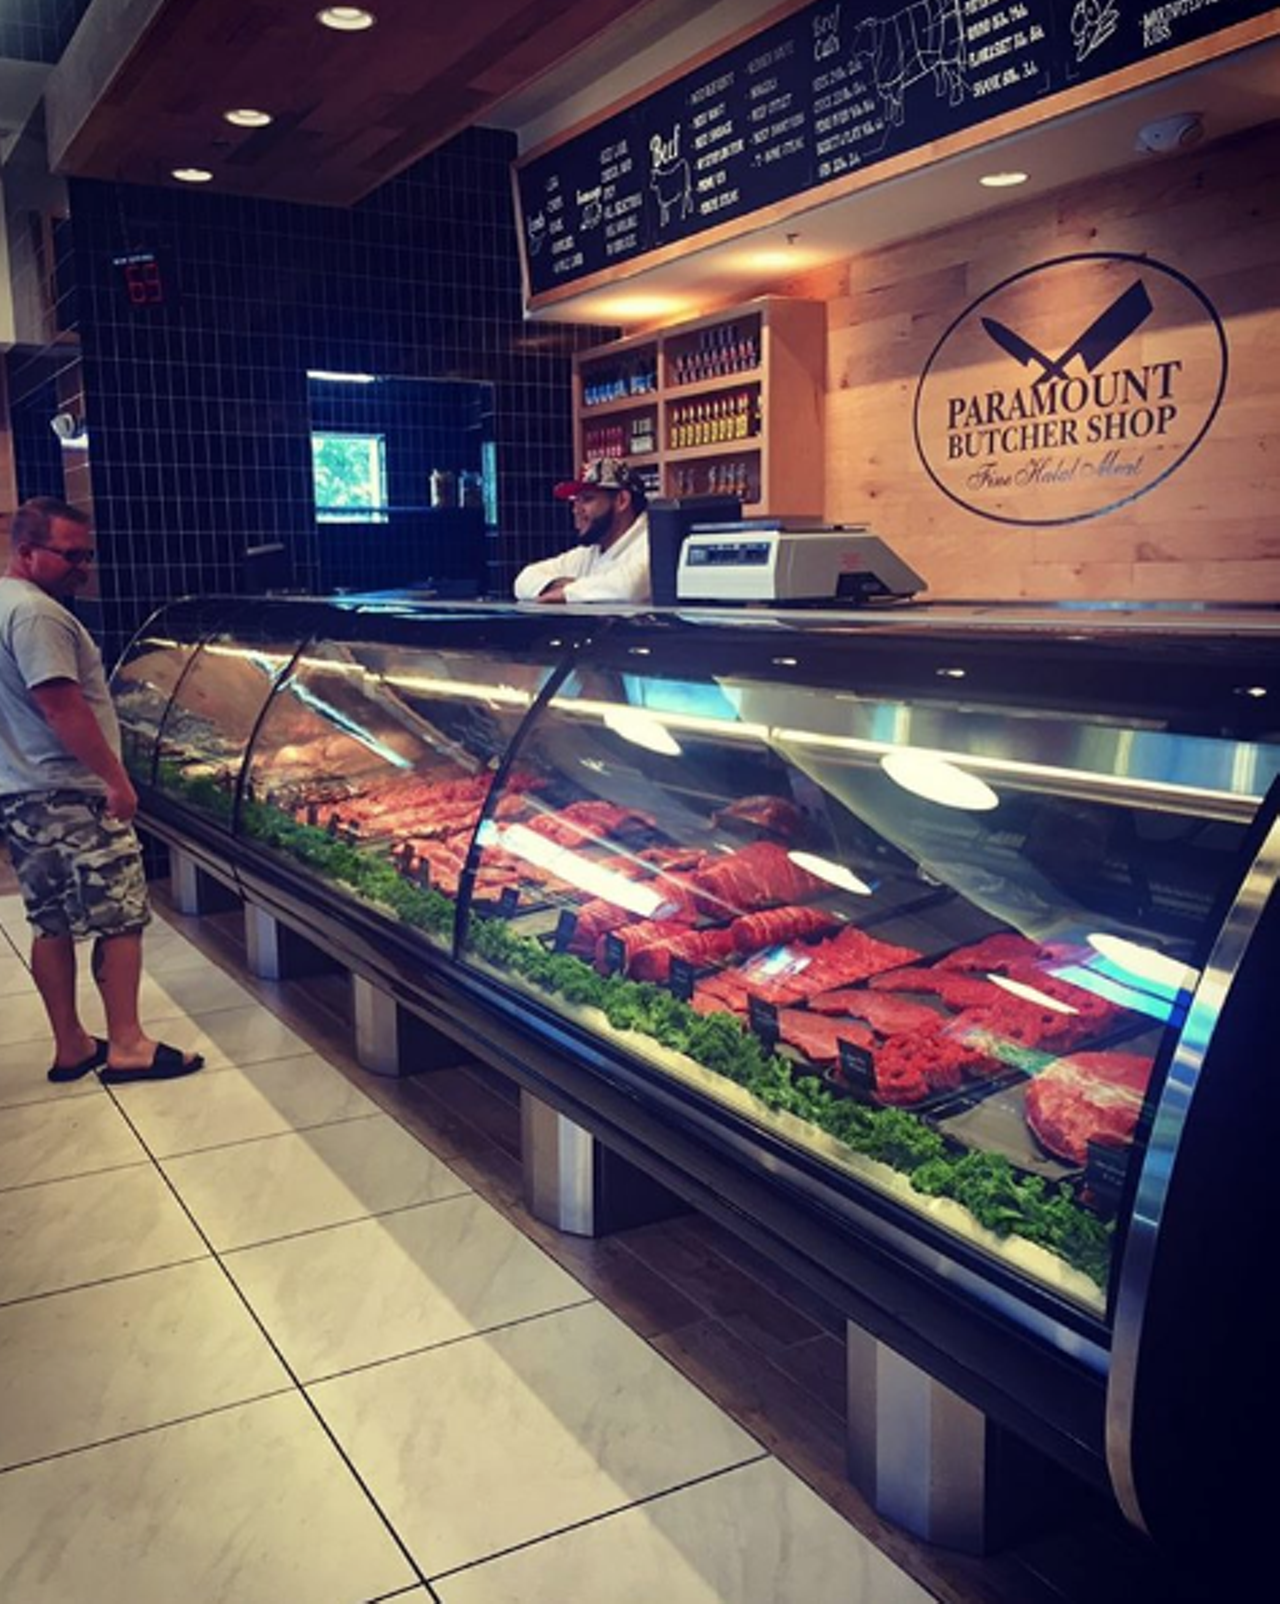  Paramount Butcher Shop
448 S. Alafaya Trail, #6, 407-730-3198
Halal butcher shop selling beef, veal, lamb and goat, plus more than 20 specialty halal deli meats that are certified free range, grass-fed, antibiotic/hormone-free. 
Photo via paramountfinefoods_usa/Instagram